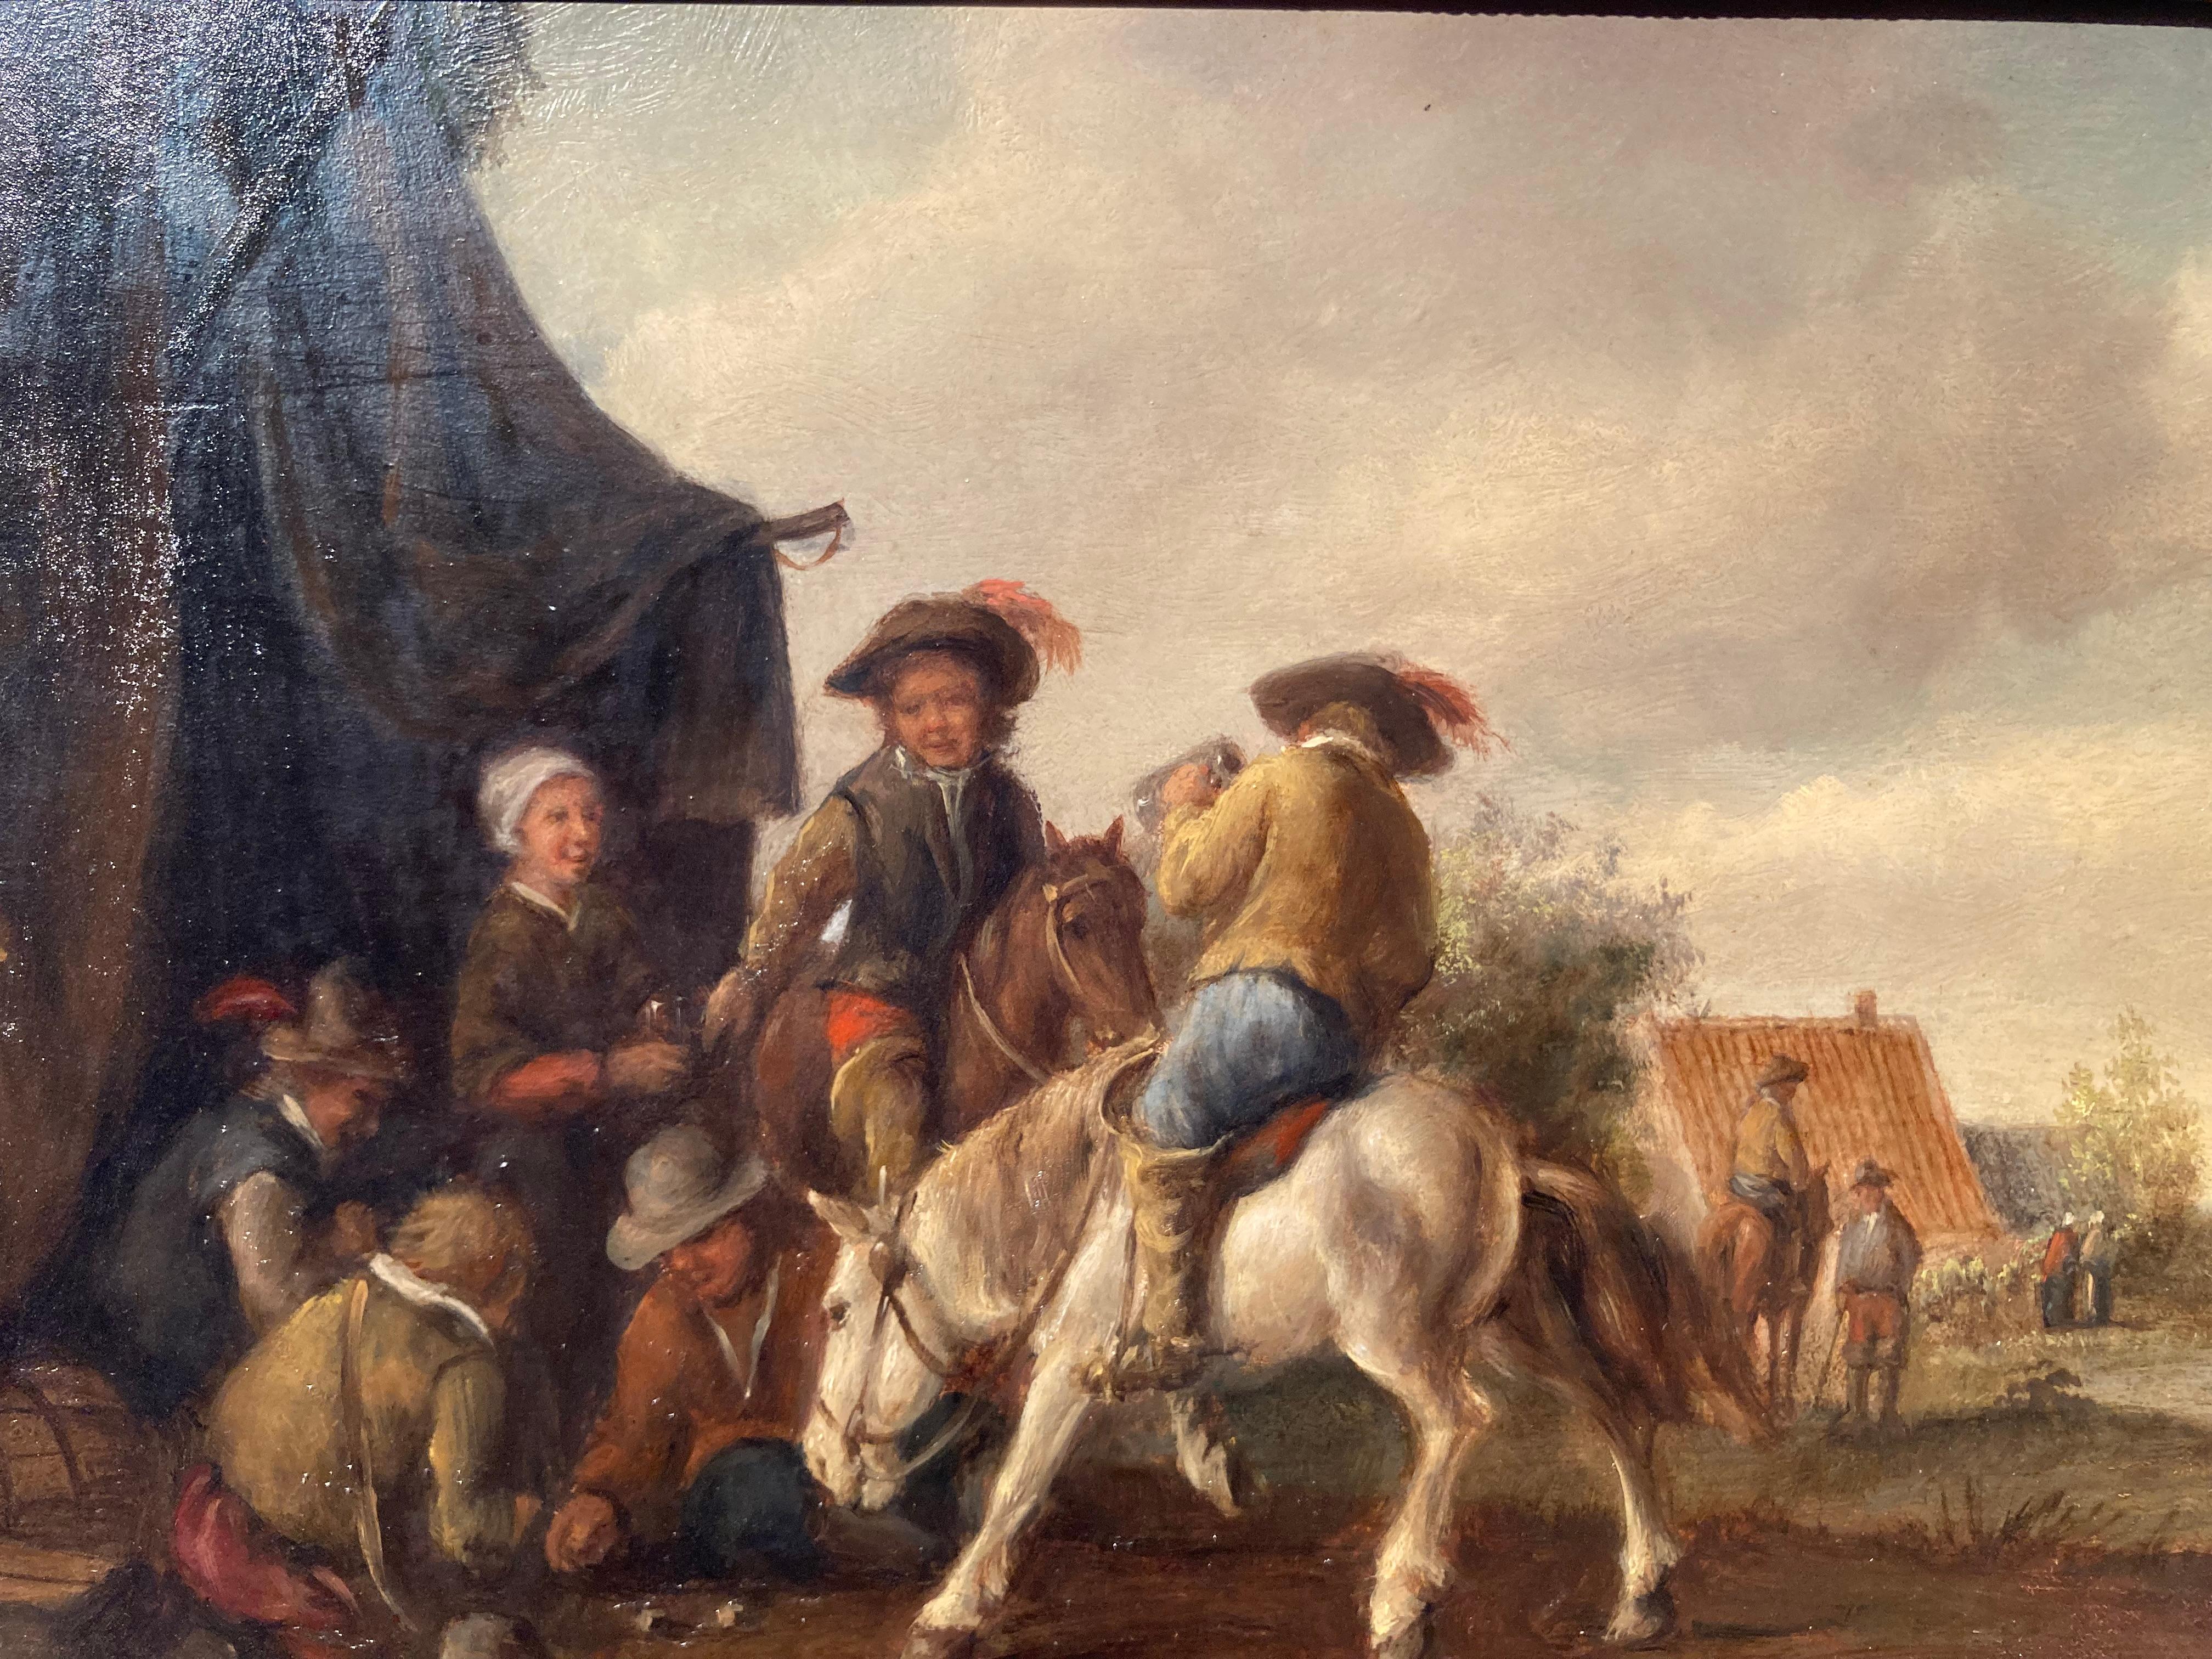 Circle Wouwerman, Horseman by a Tent, Riders Playing Cards, Dutch Old Master - Painting by Philips Wouwerman